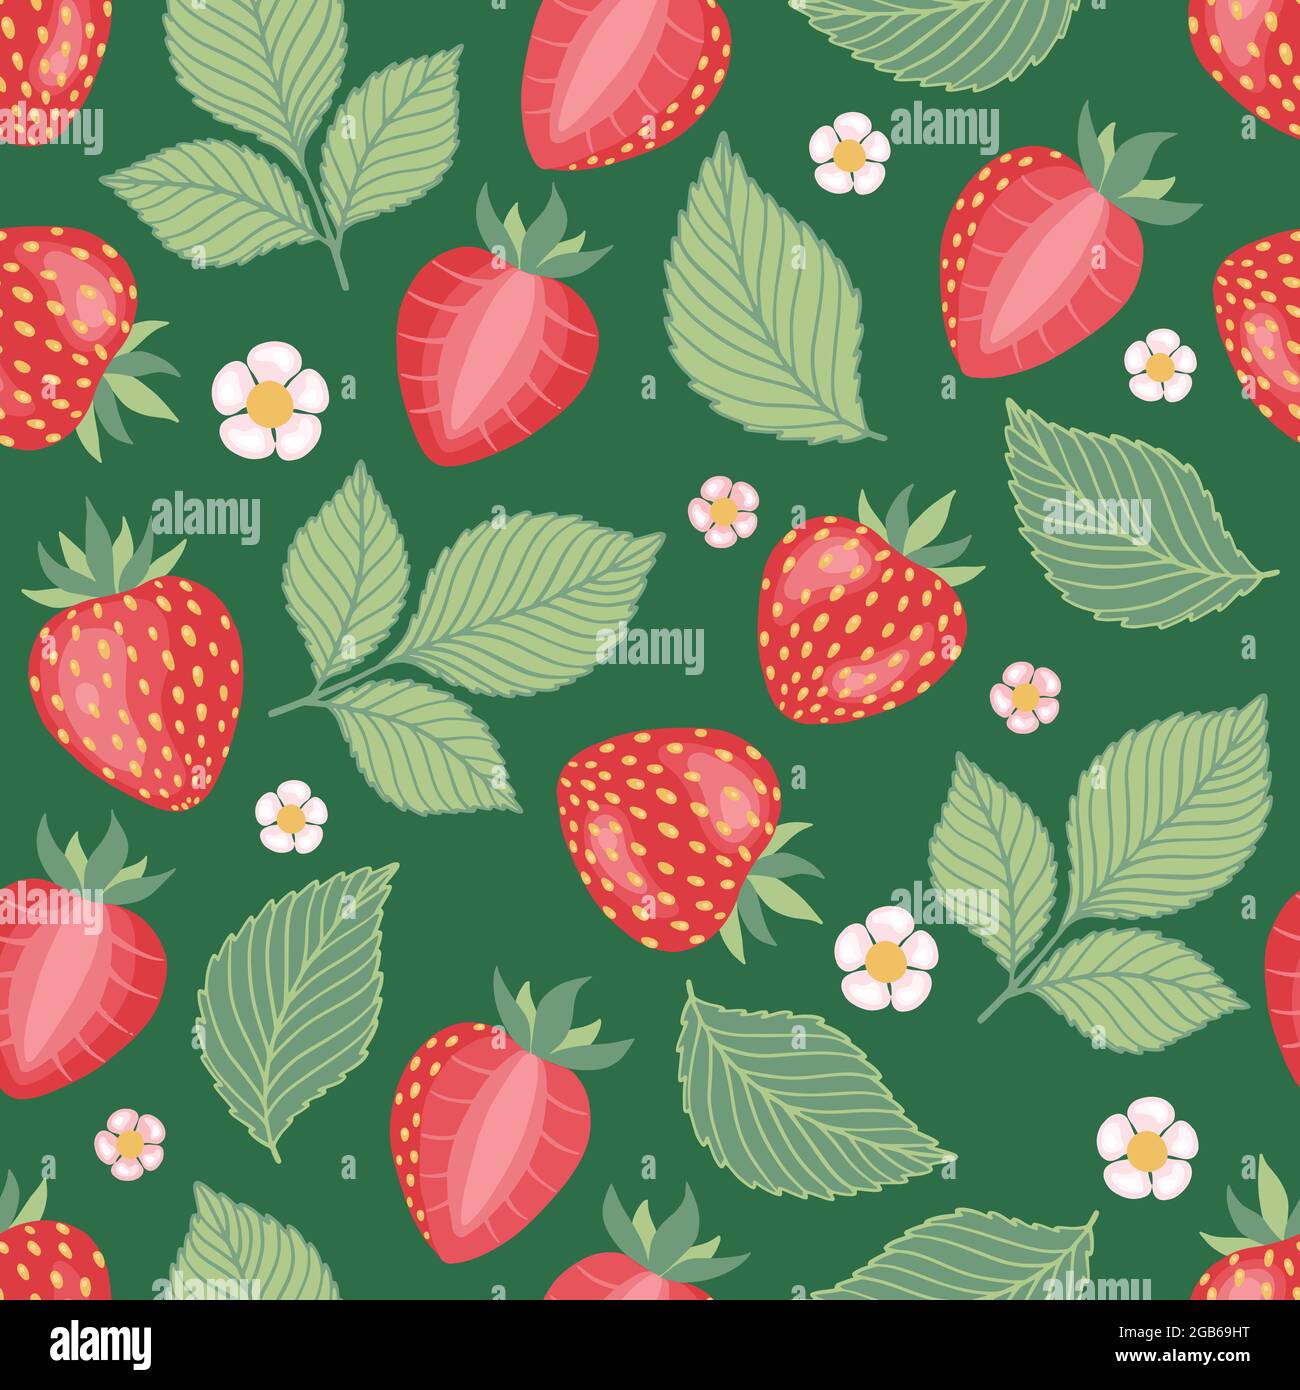 Cartoon bright strawberries seamless pattern. Vector background of fresh farm organic berry used for magazine, book,card, menu cover, web pages. Stock Vector